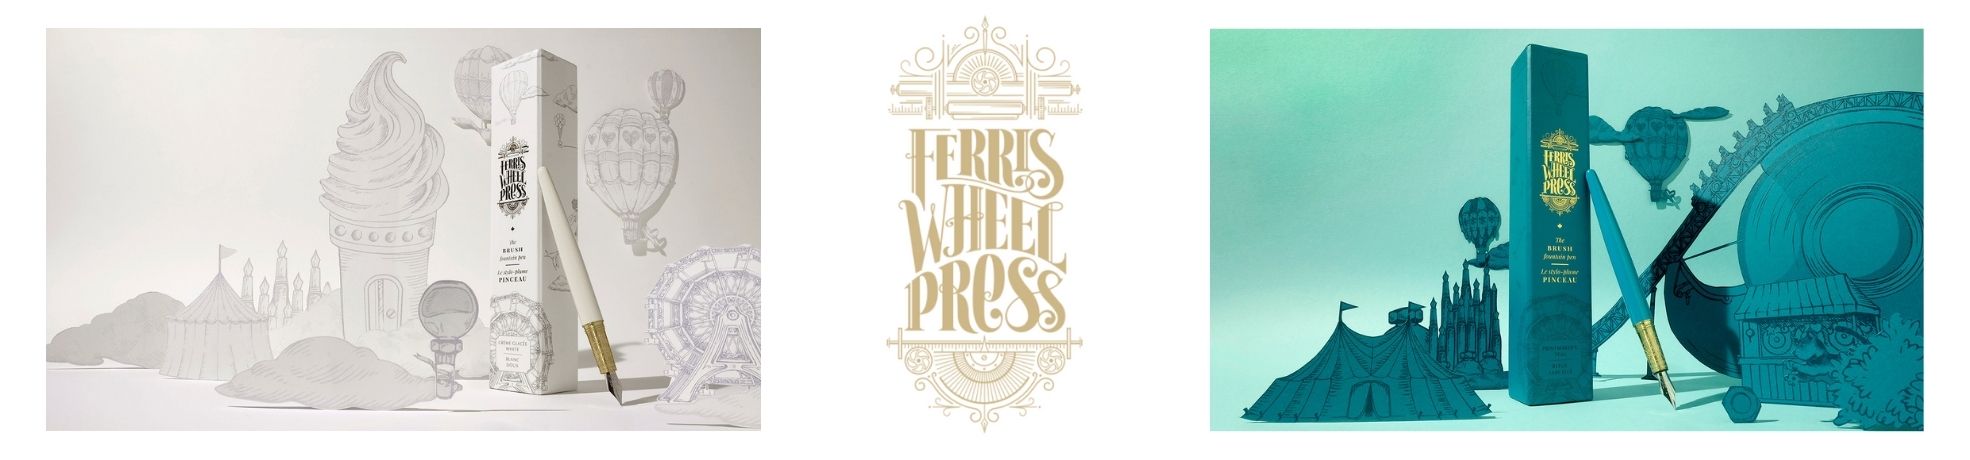 Ferris Wheel Press Collection - Fountain Pens and Inks